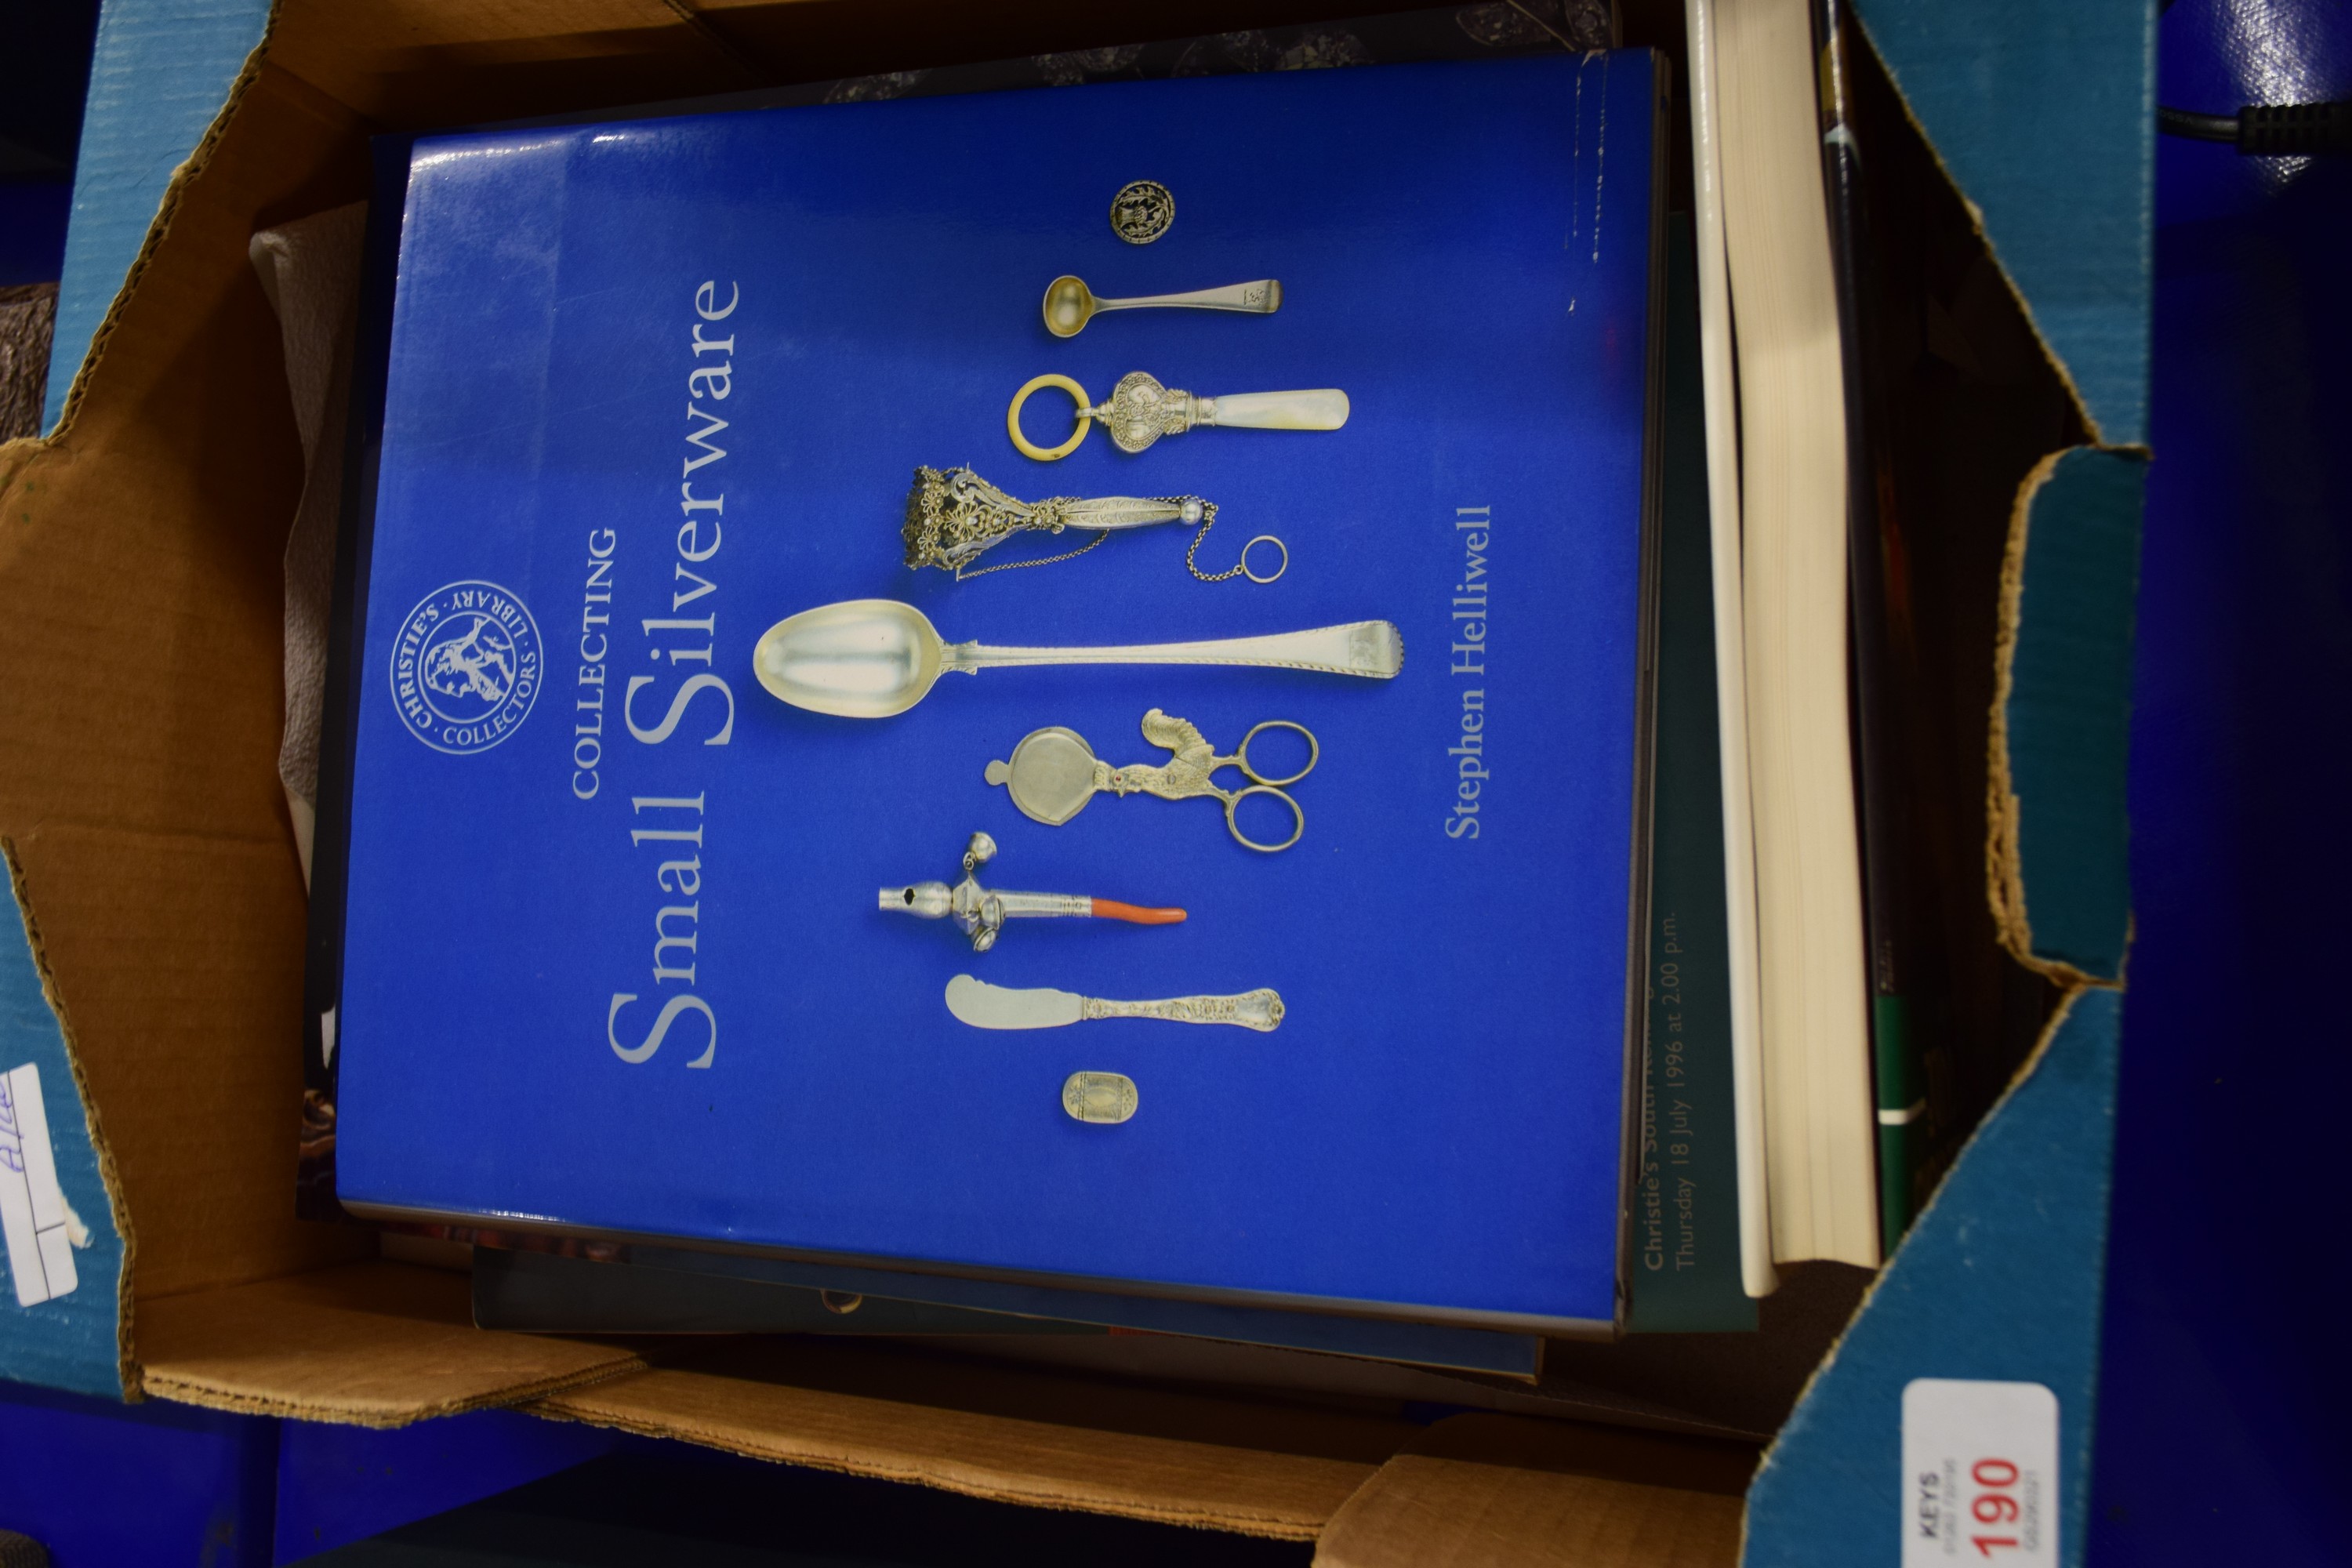 BOX OF AUCTION CATALOGUES AND CHRISTIES "COLLECTING SMALL SILVERWARE" BOOK